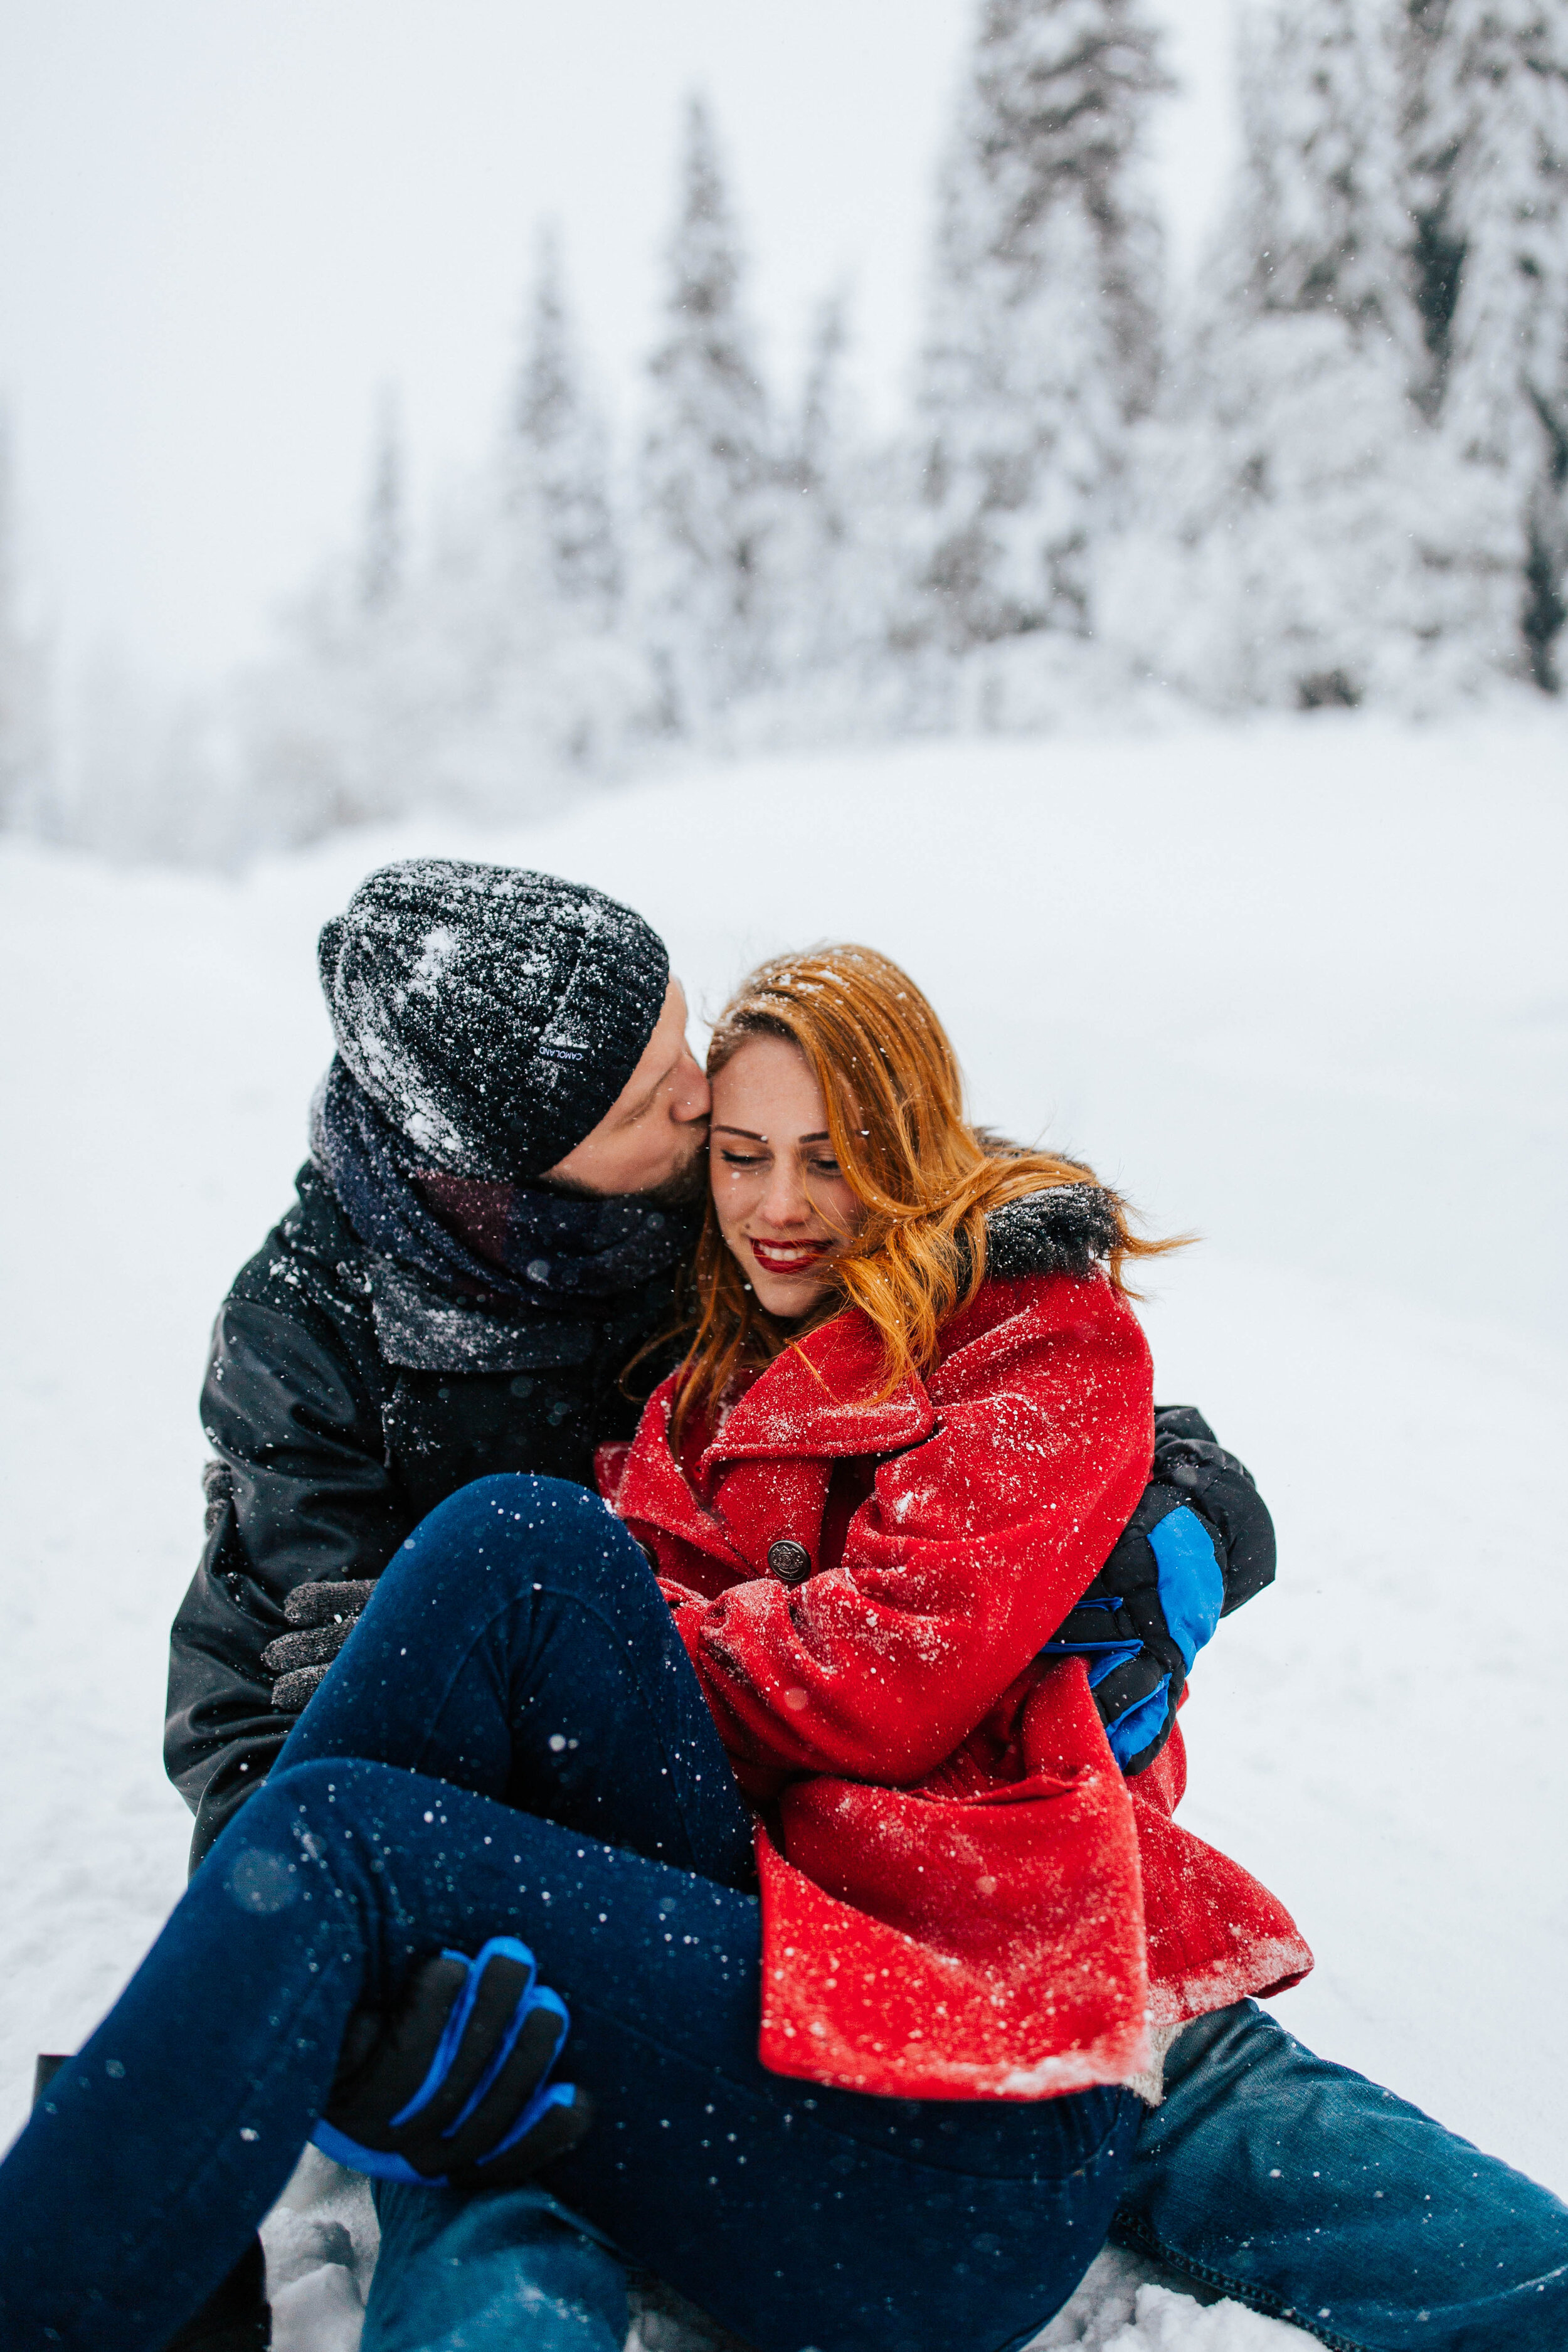 Winter couples session engagements snow mountains cozy wrapped in blanket #coupleshoot #utahphotographer #weddingphotographer #engagementsession #engagementshoot